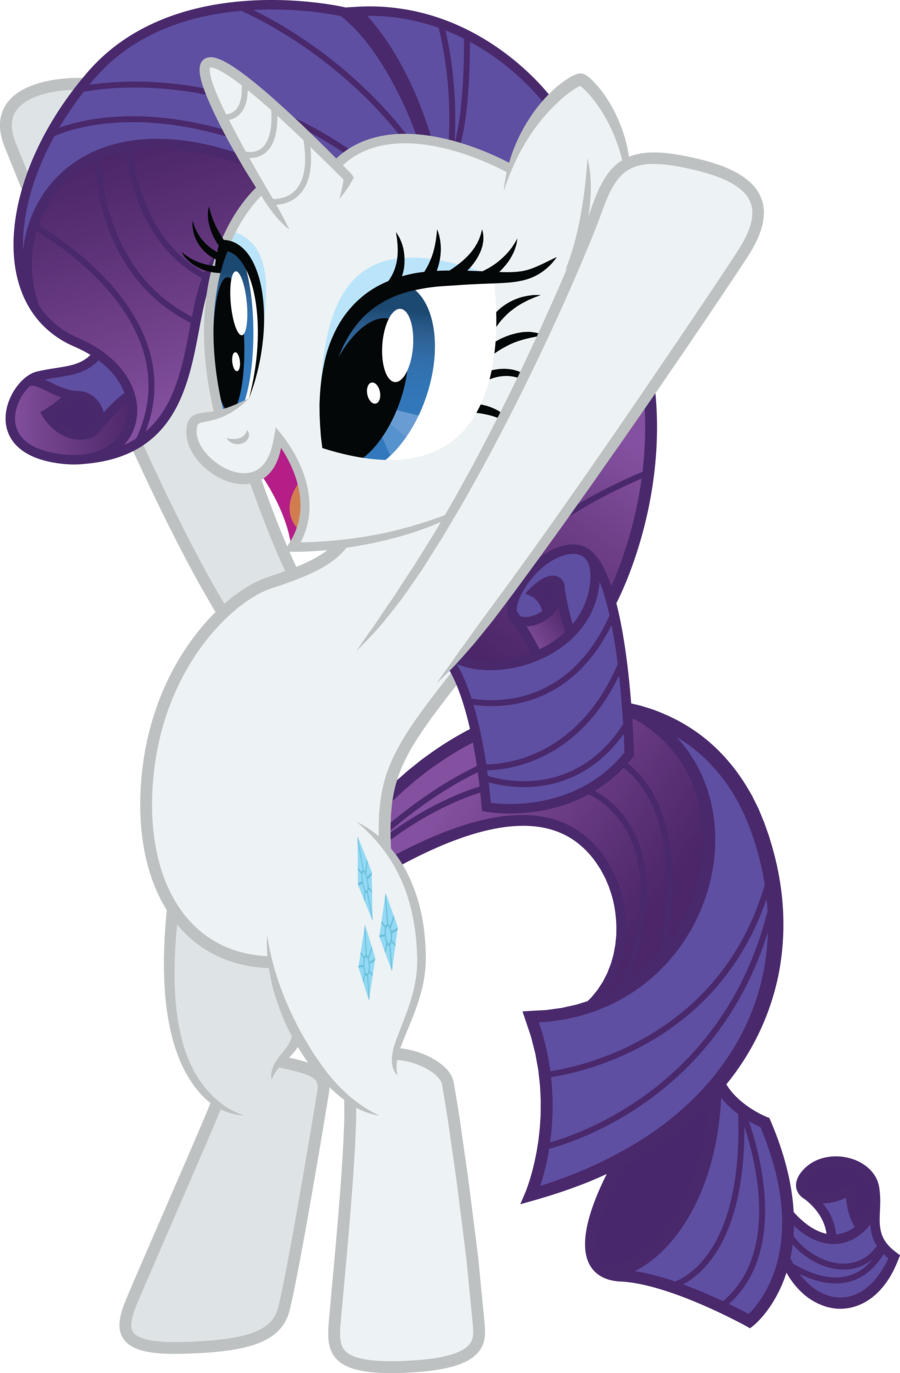 rarity___yay_by_quanno3-d53k0k5.png